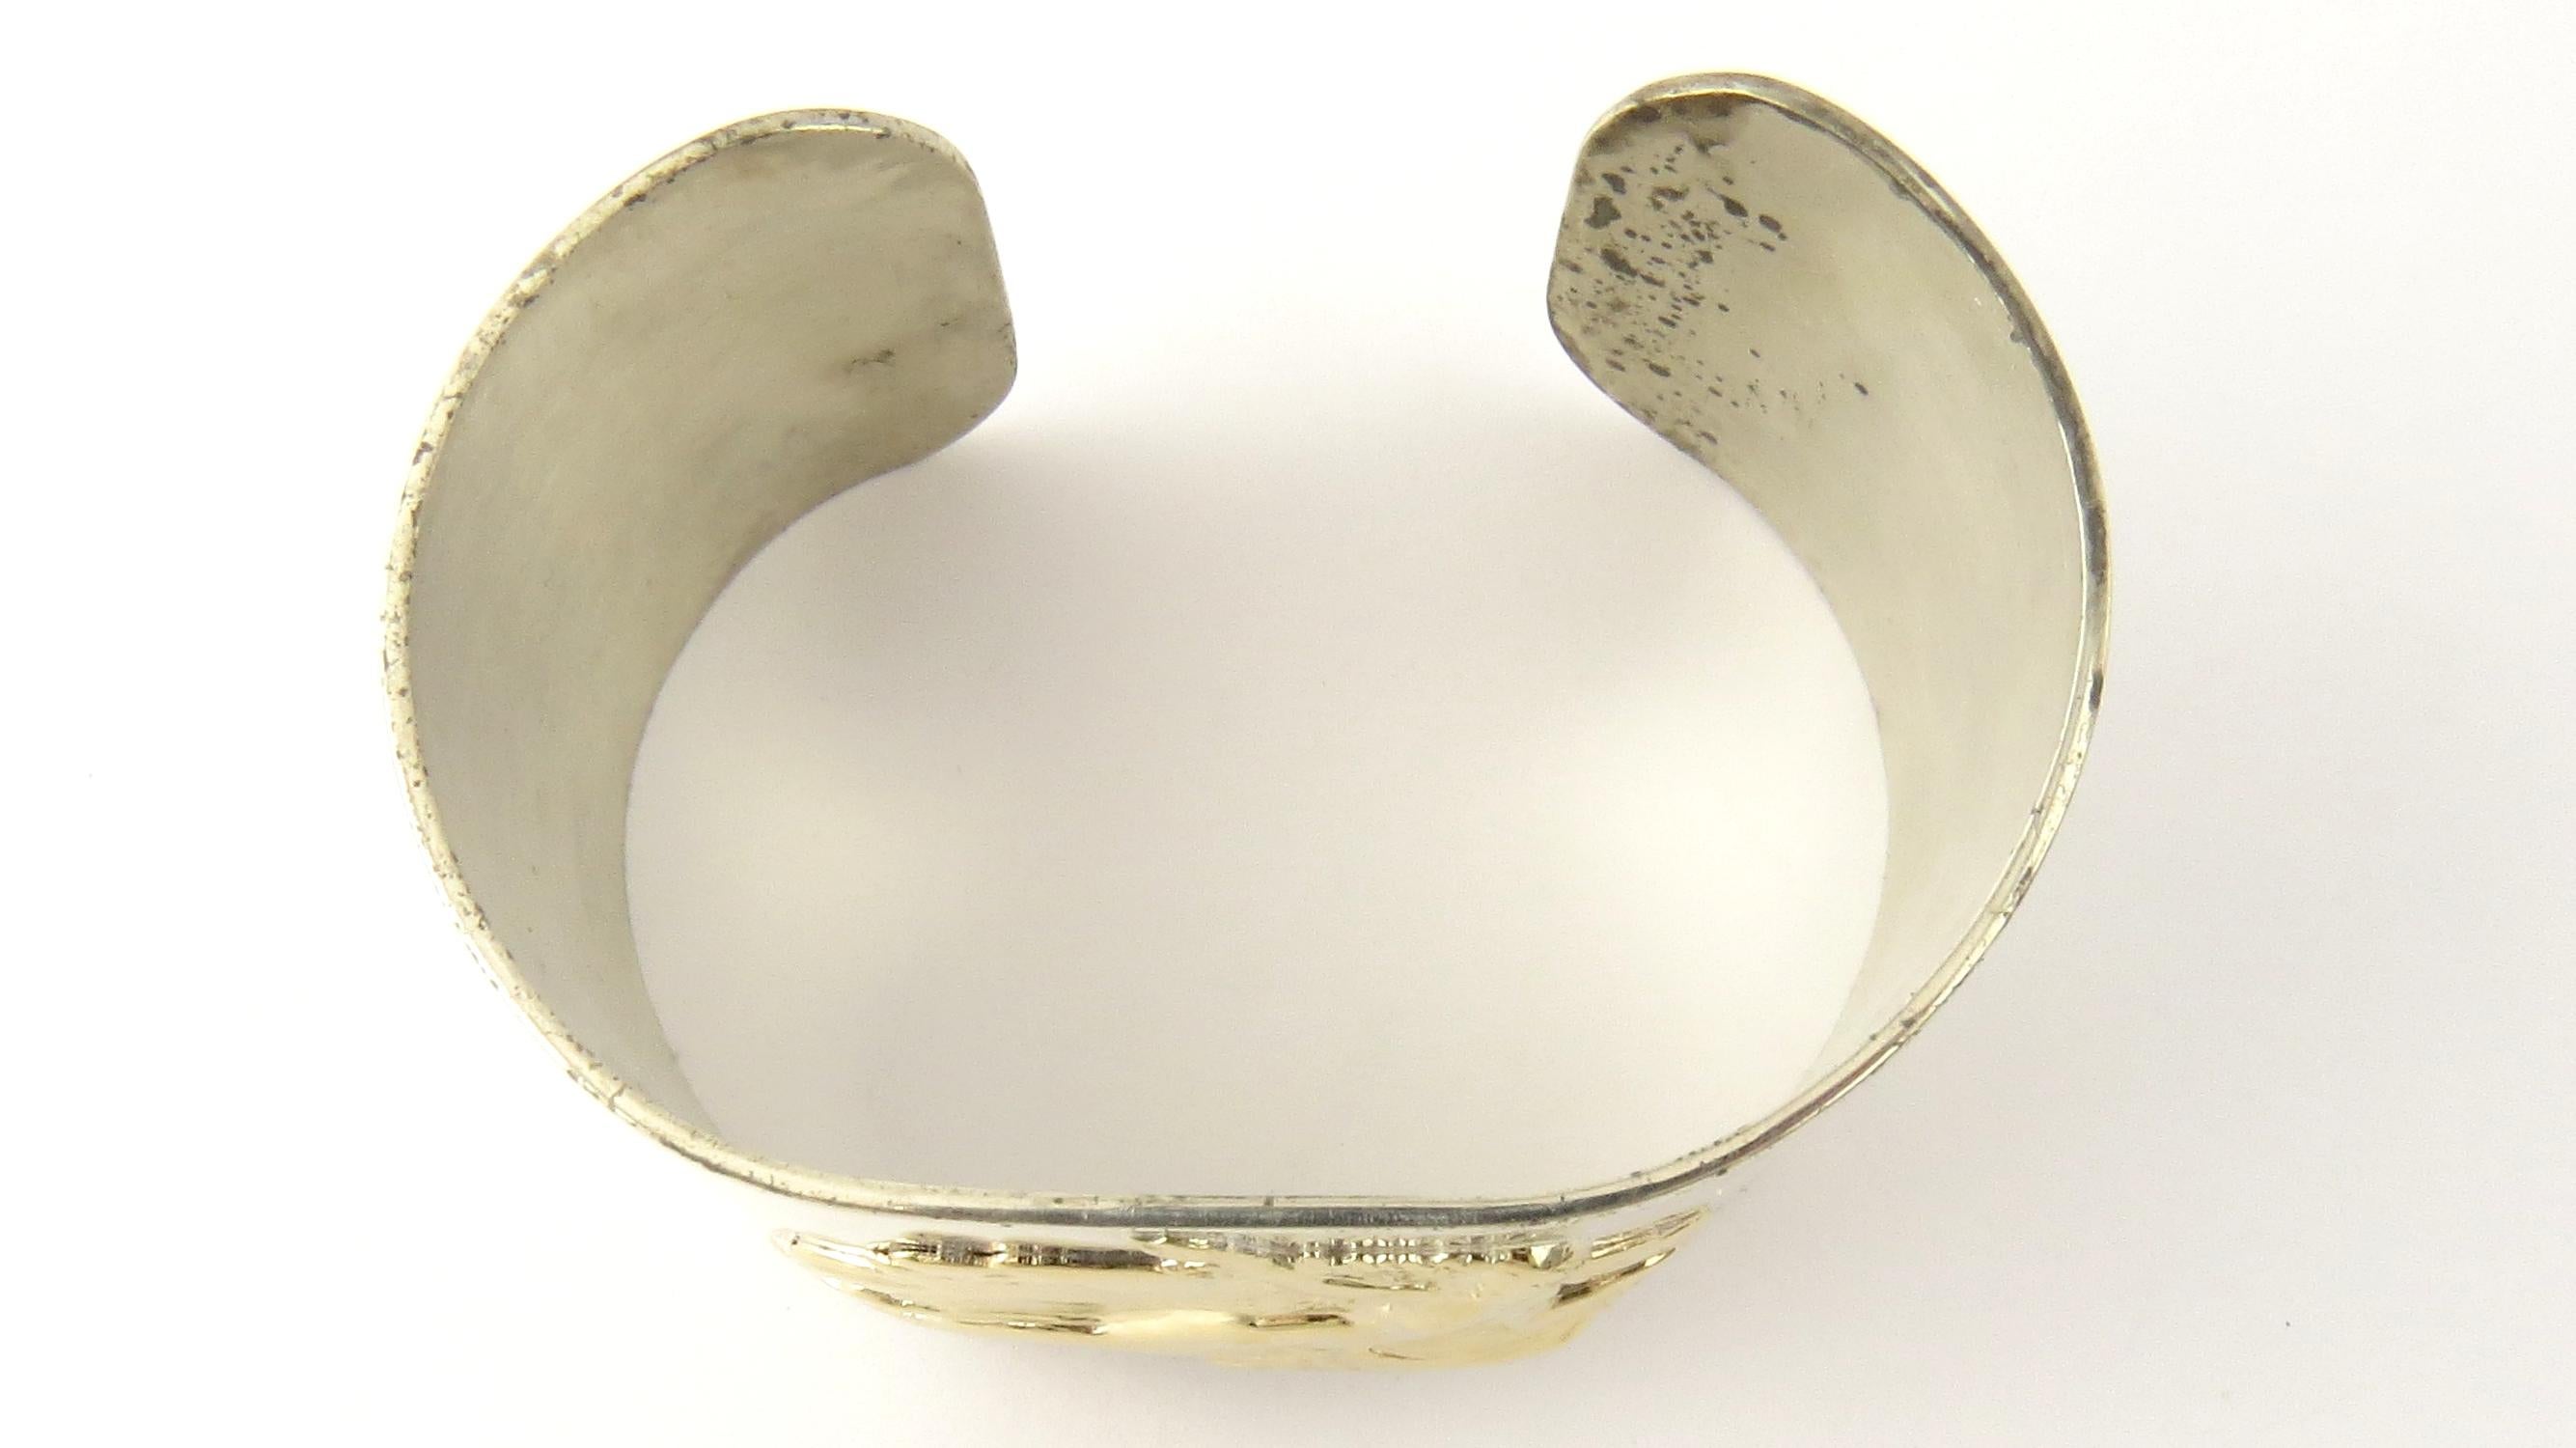 Vintage Pierre Cardin Sterling Silver and 14K Yellow Gold Aphrodite Mermaid Cuff Bracelet

This lovely sterling silver open cuff bracelet features Aphrodite, the goddess of love, crafted in classic 14K yellow gold. Width: 32 mm.

Size: 7